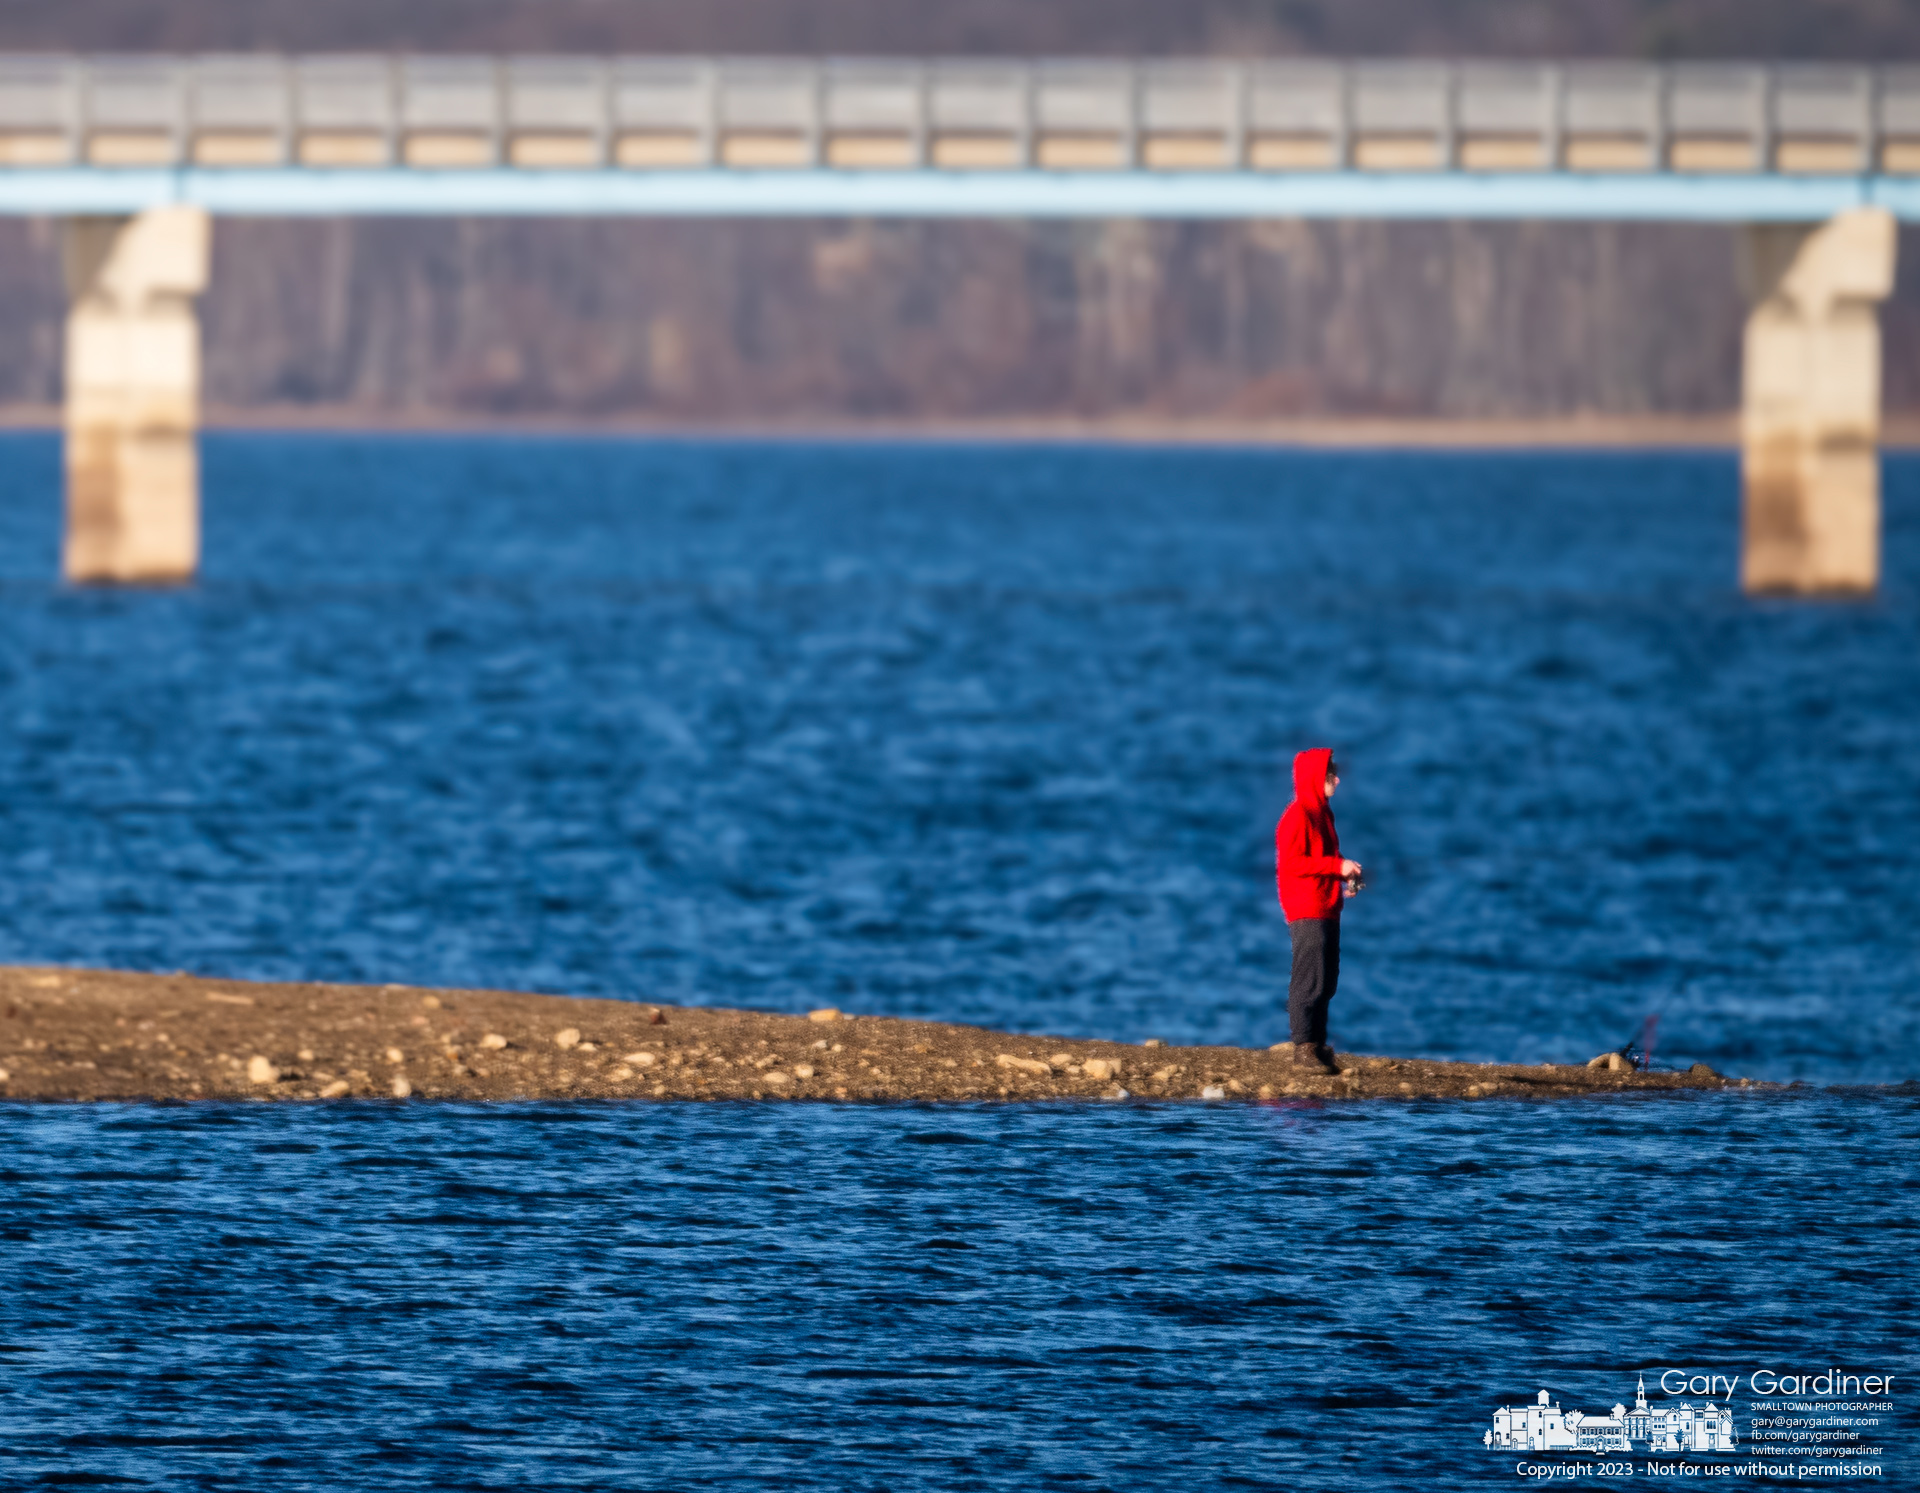 A lone fisherman stands on a narrow slice of land exposed by low water level at Hoover Reservoir. My Final Photo for December 20, 2023.